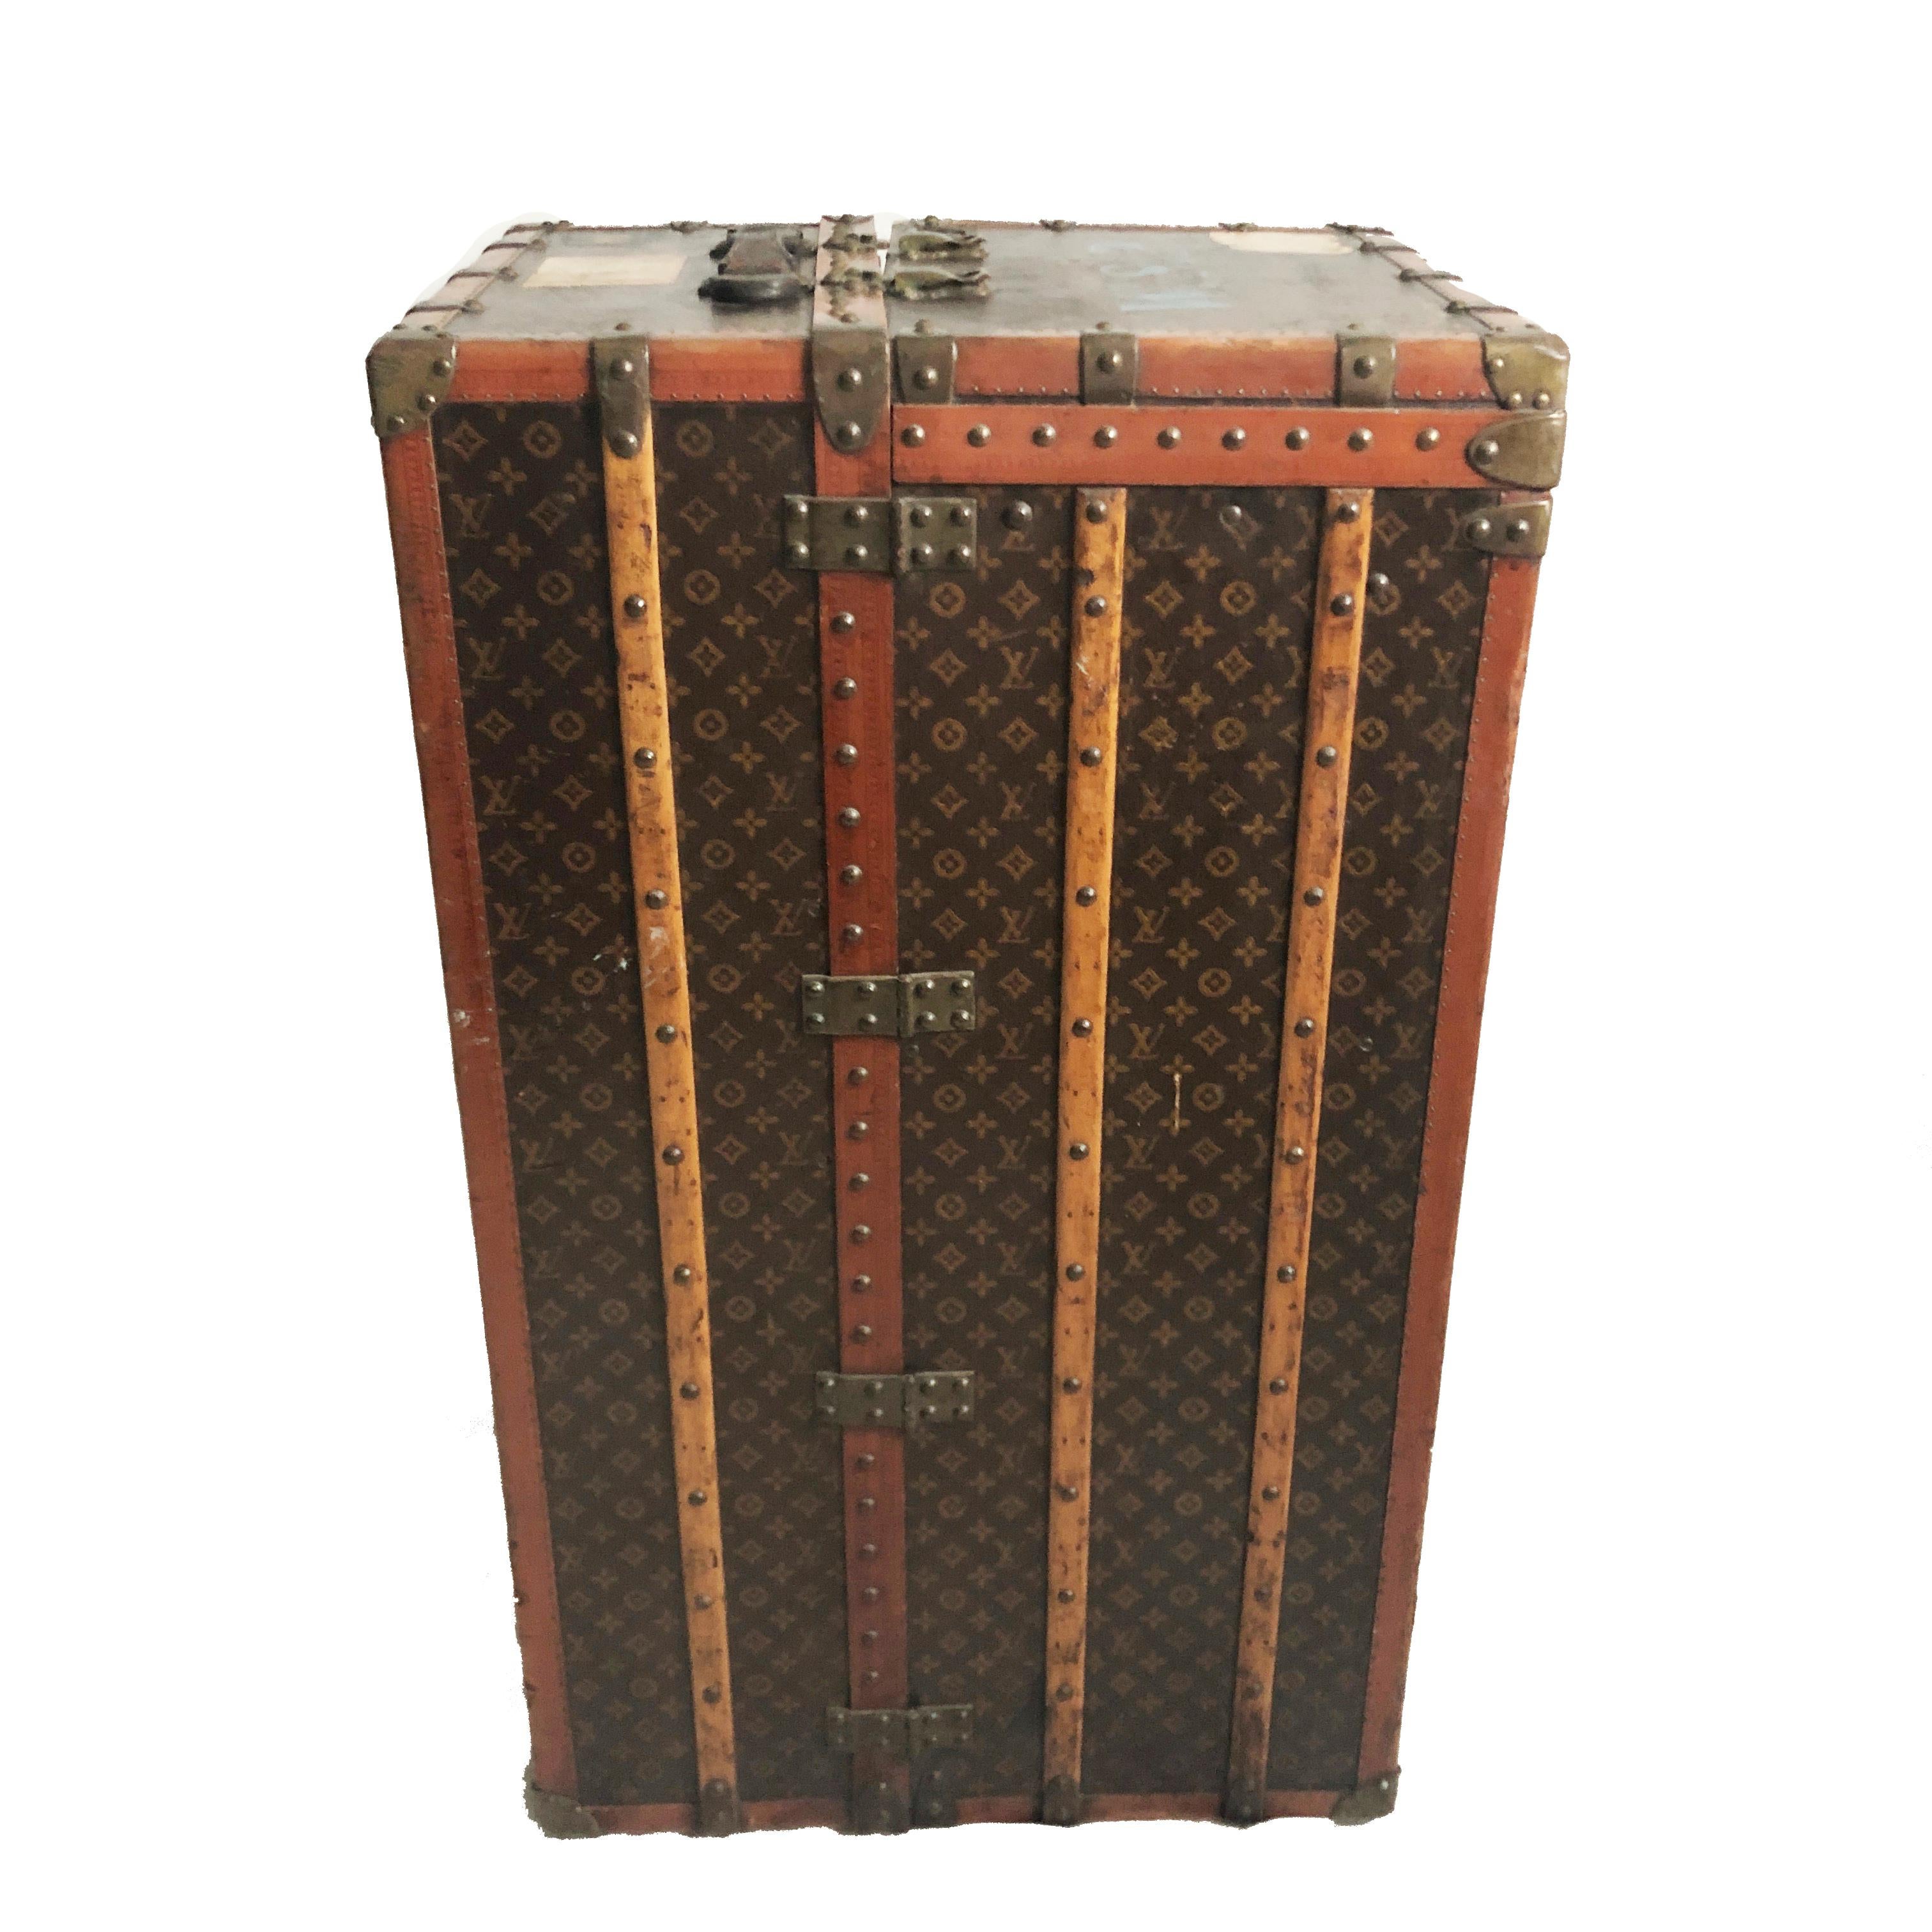 Louis Vuitton Large Wardrobe Steamer Trunk Monogram Travel Case Early 20th C  For Sale 3